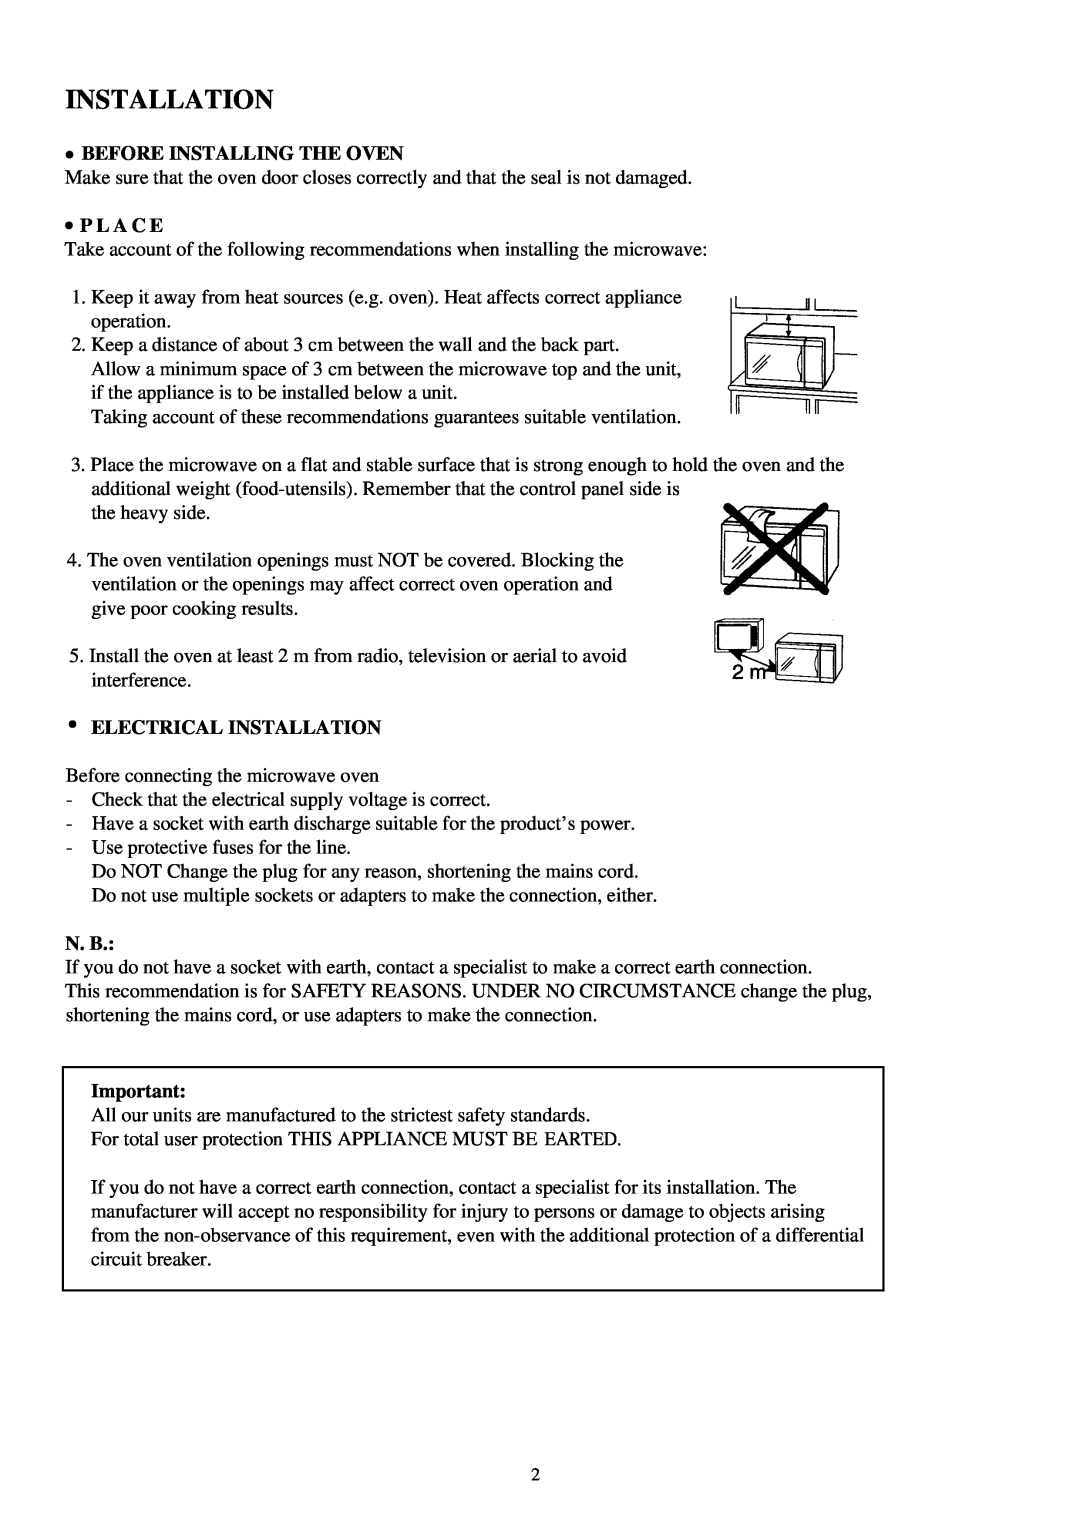 Palsonic PMO-585 manual Before Installing The Oven, P L A C E, Electrical Installation, N. B 